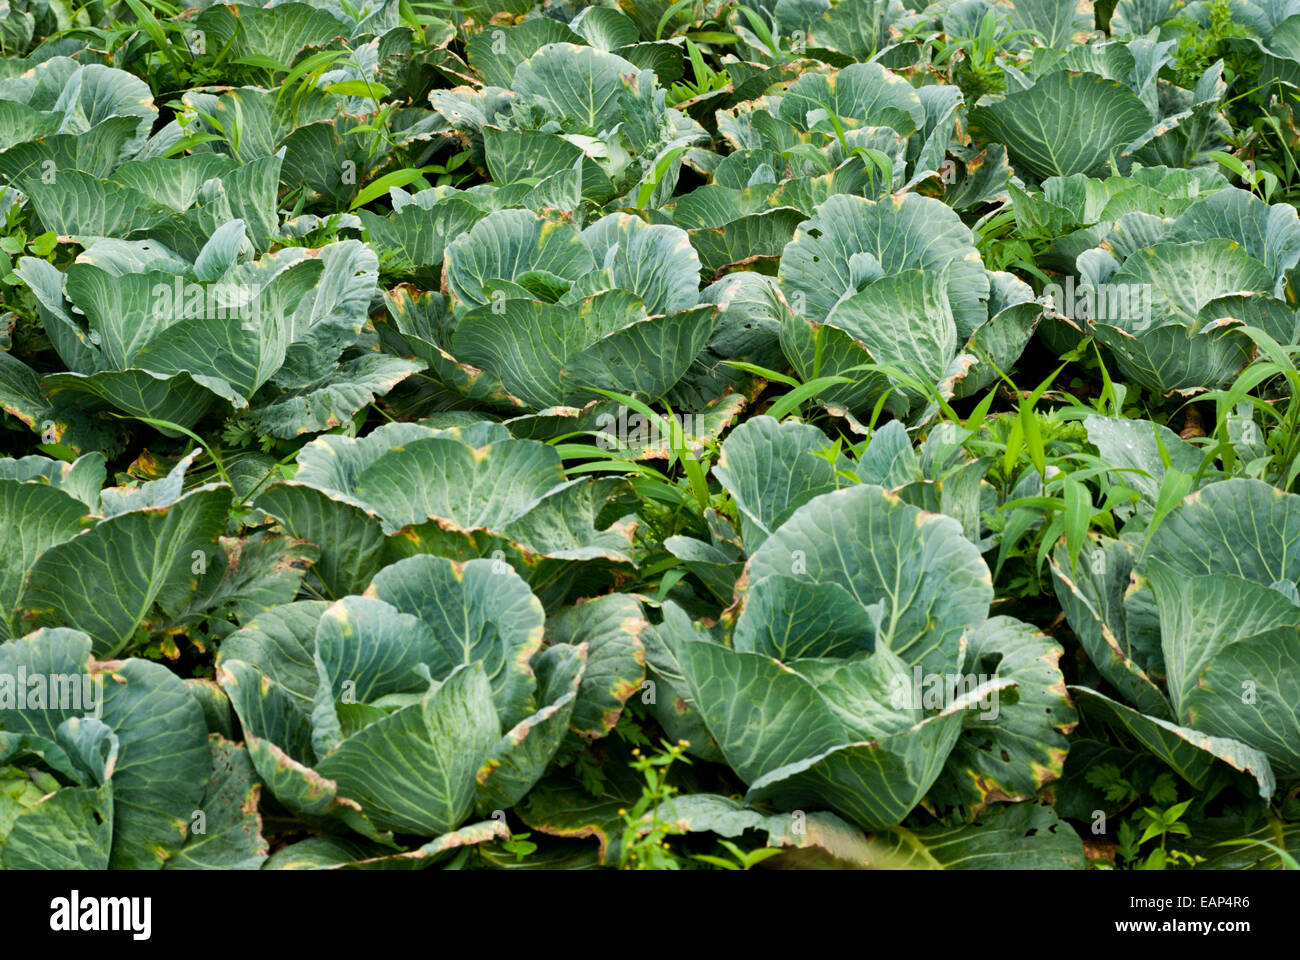 Cabbage farming in North Sulawesi, Indonesia. Stock Photo